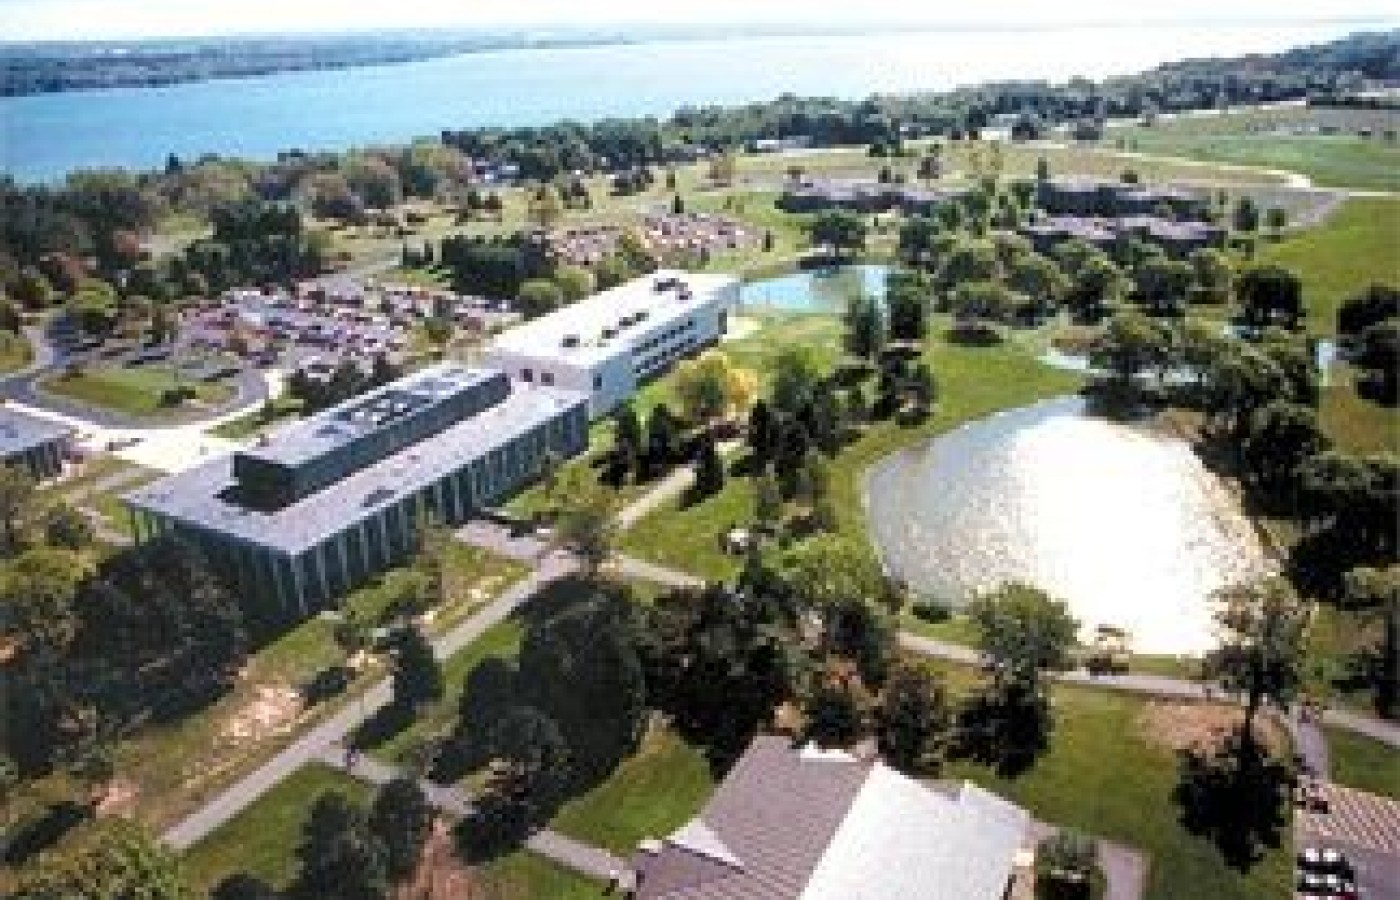 An aerial view of New York Chiropractic College.